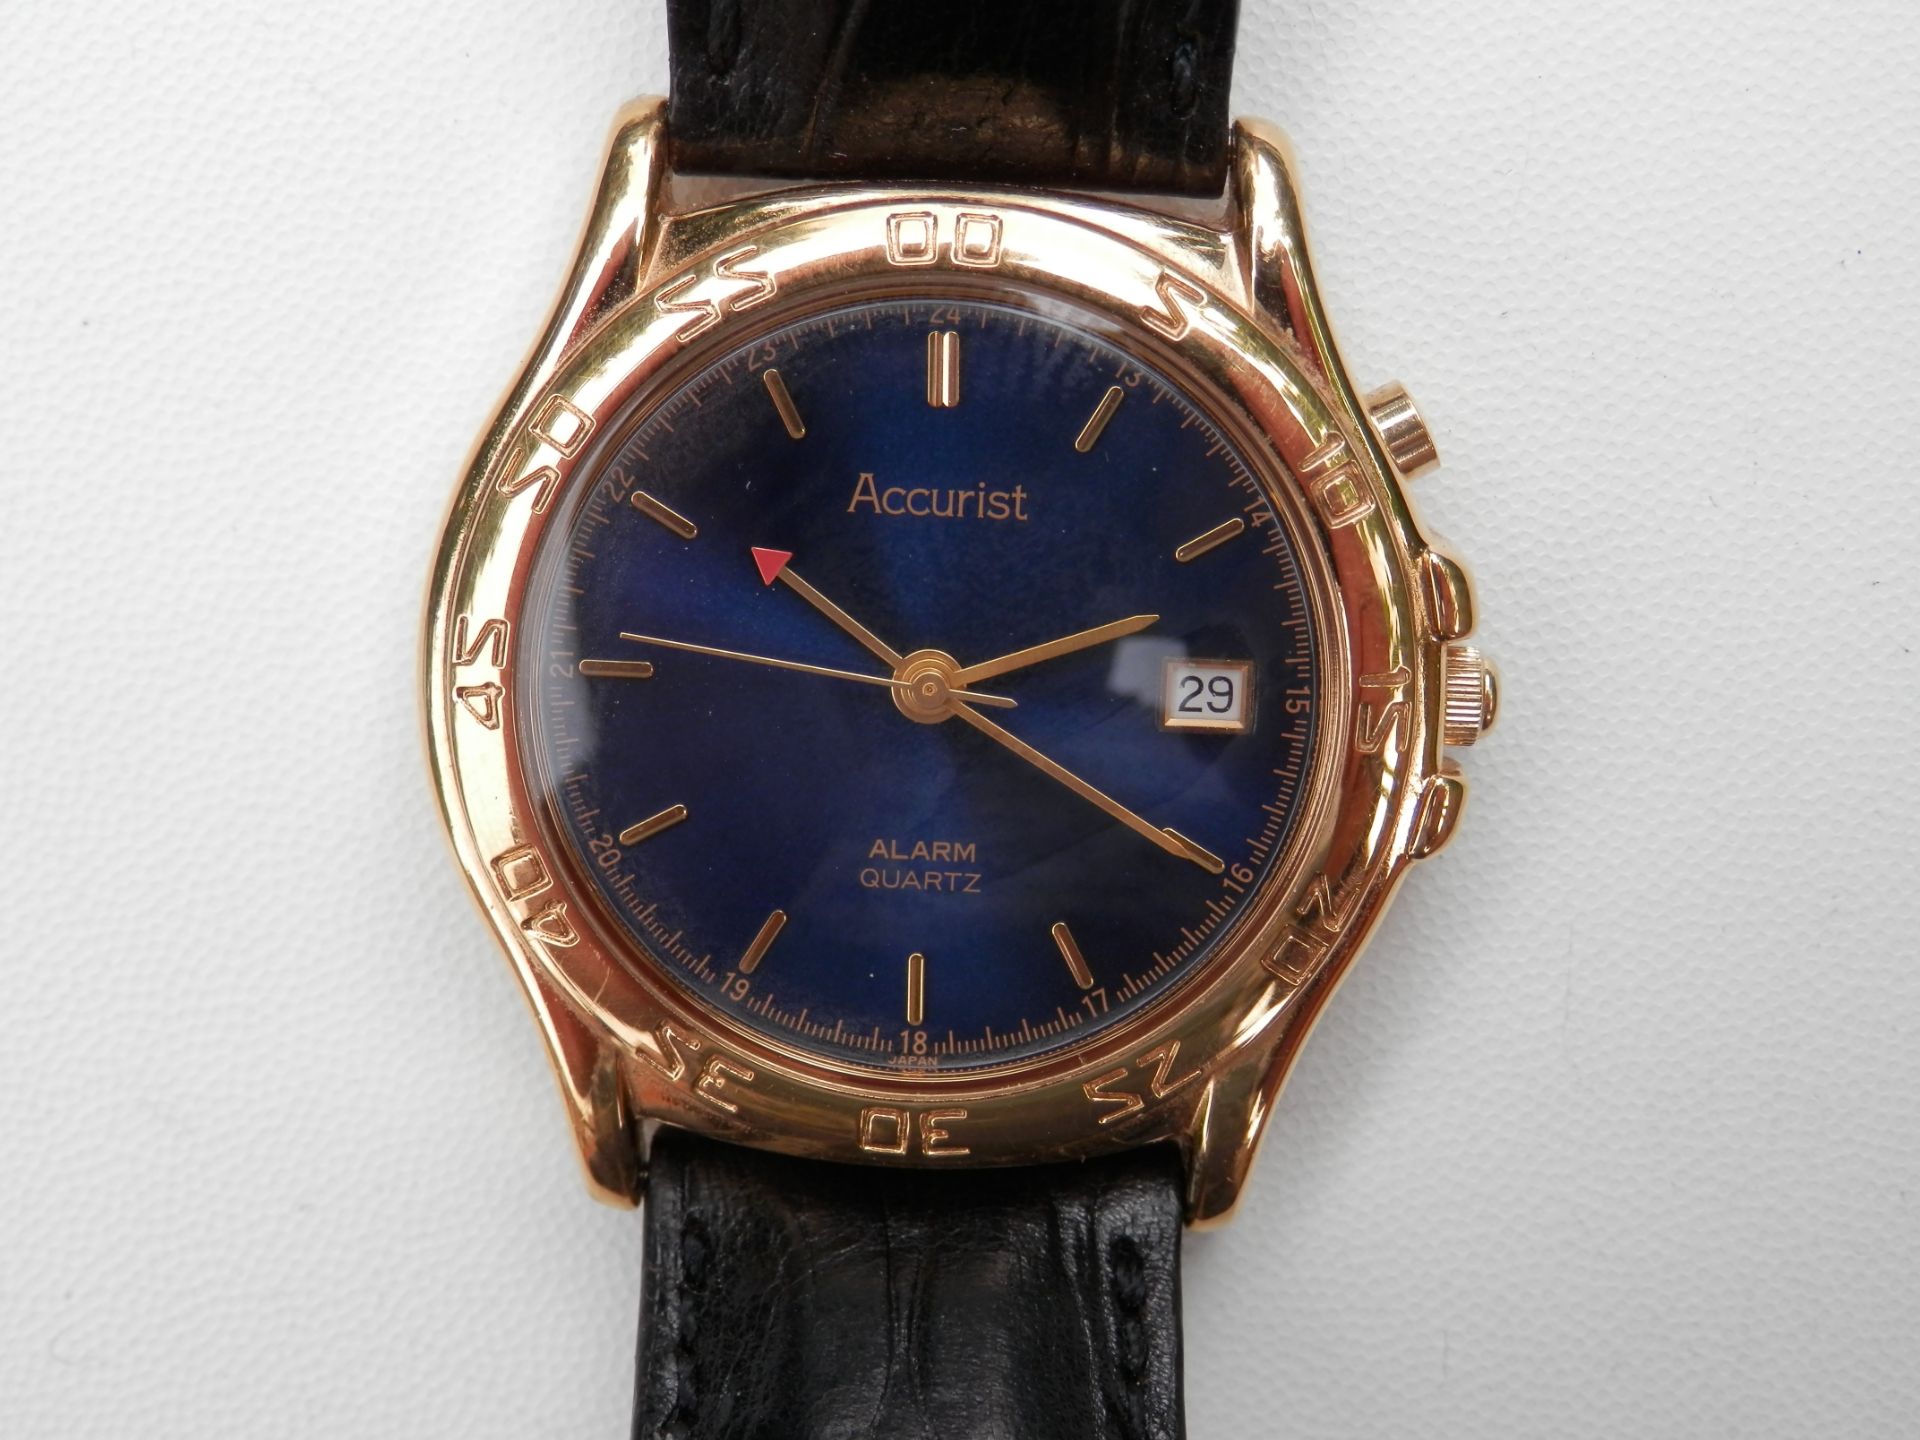 FULLY WORKING 1990S ACCURIST GENTS GOLD PLATED ANALOGUE ALARM QUARTZ WATCH, METALLIC BLUE DIAL. - Image 2 of 8